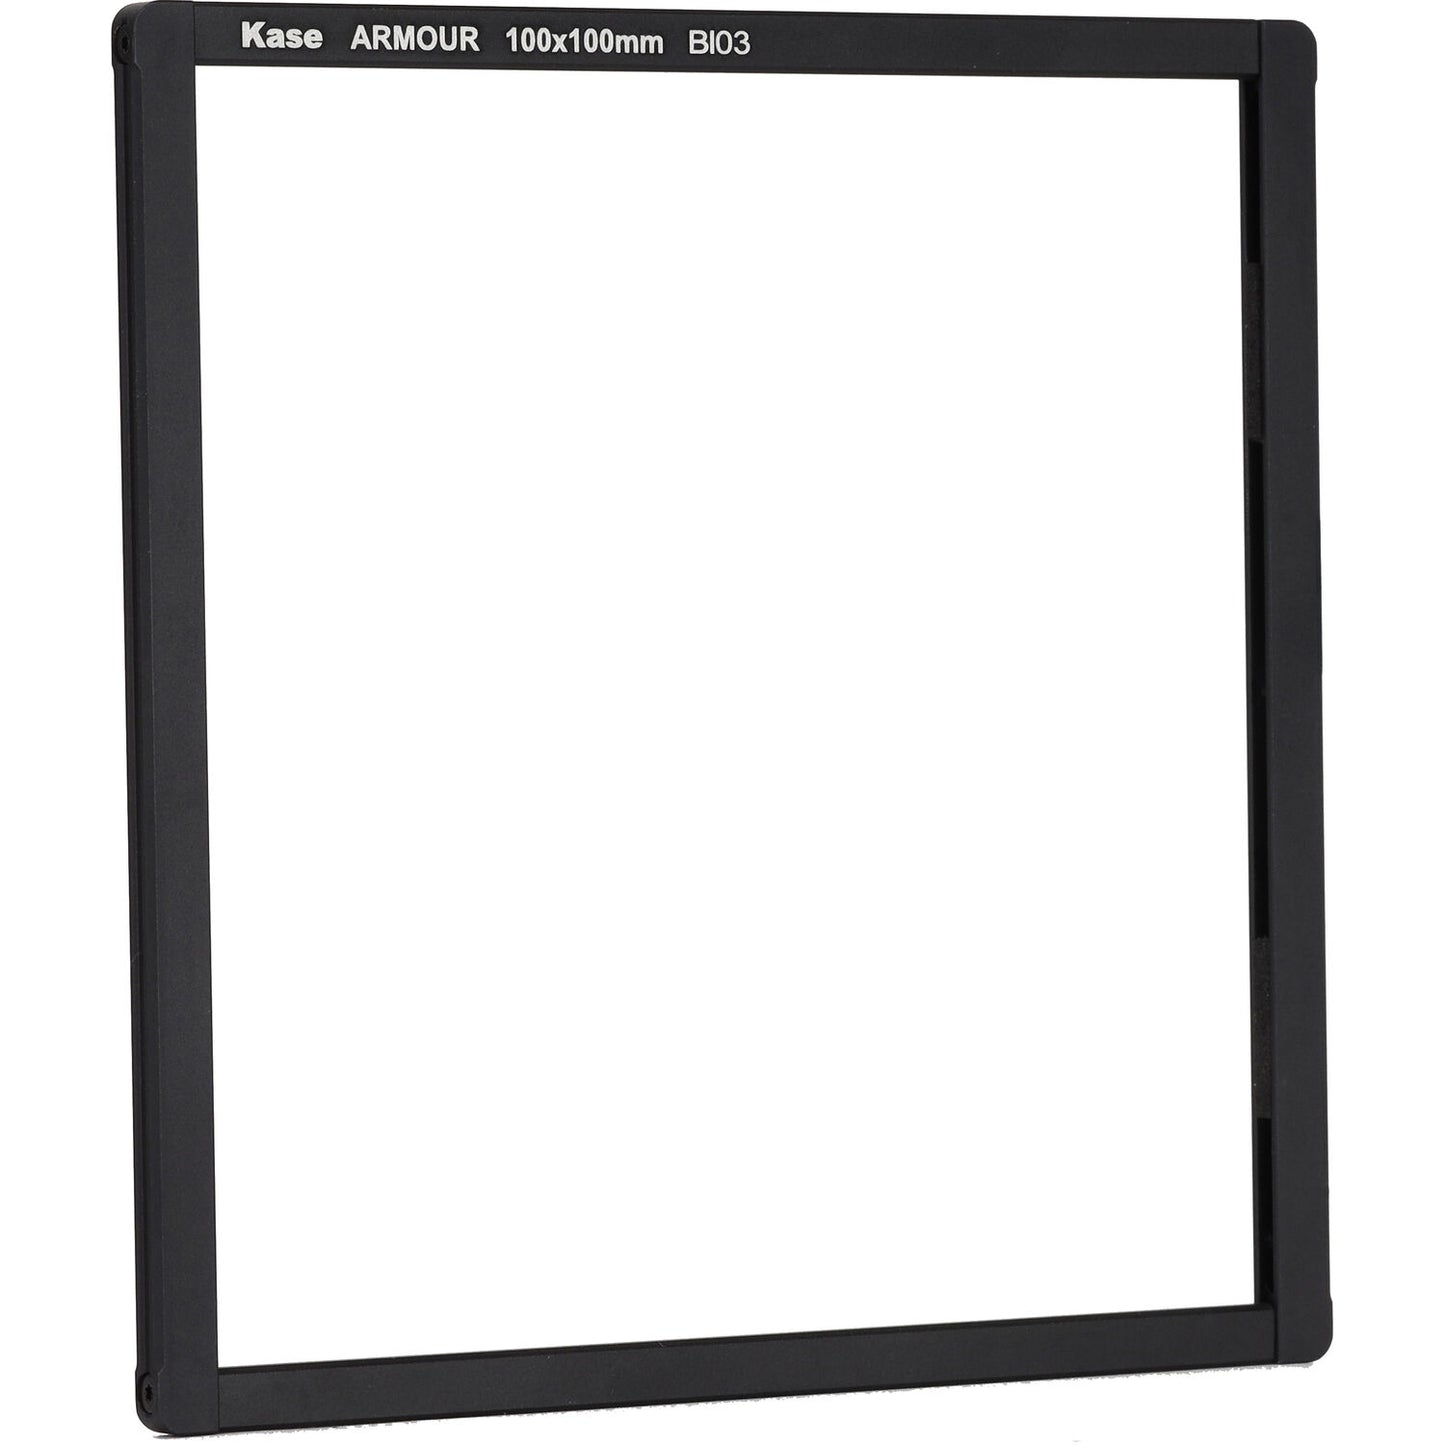 Kase Armour Magnetic Filter Frame Fits 100x100x2mm Filters